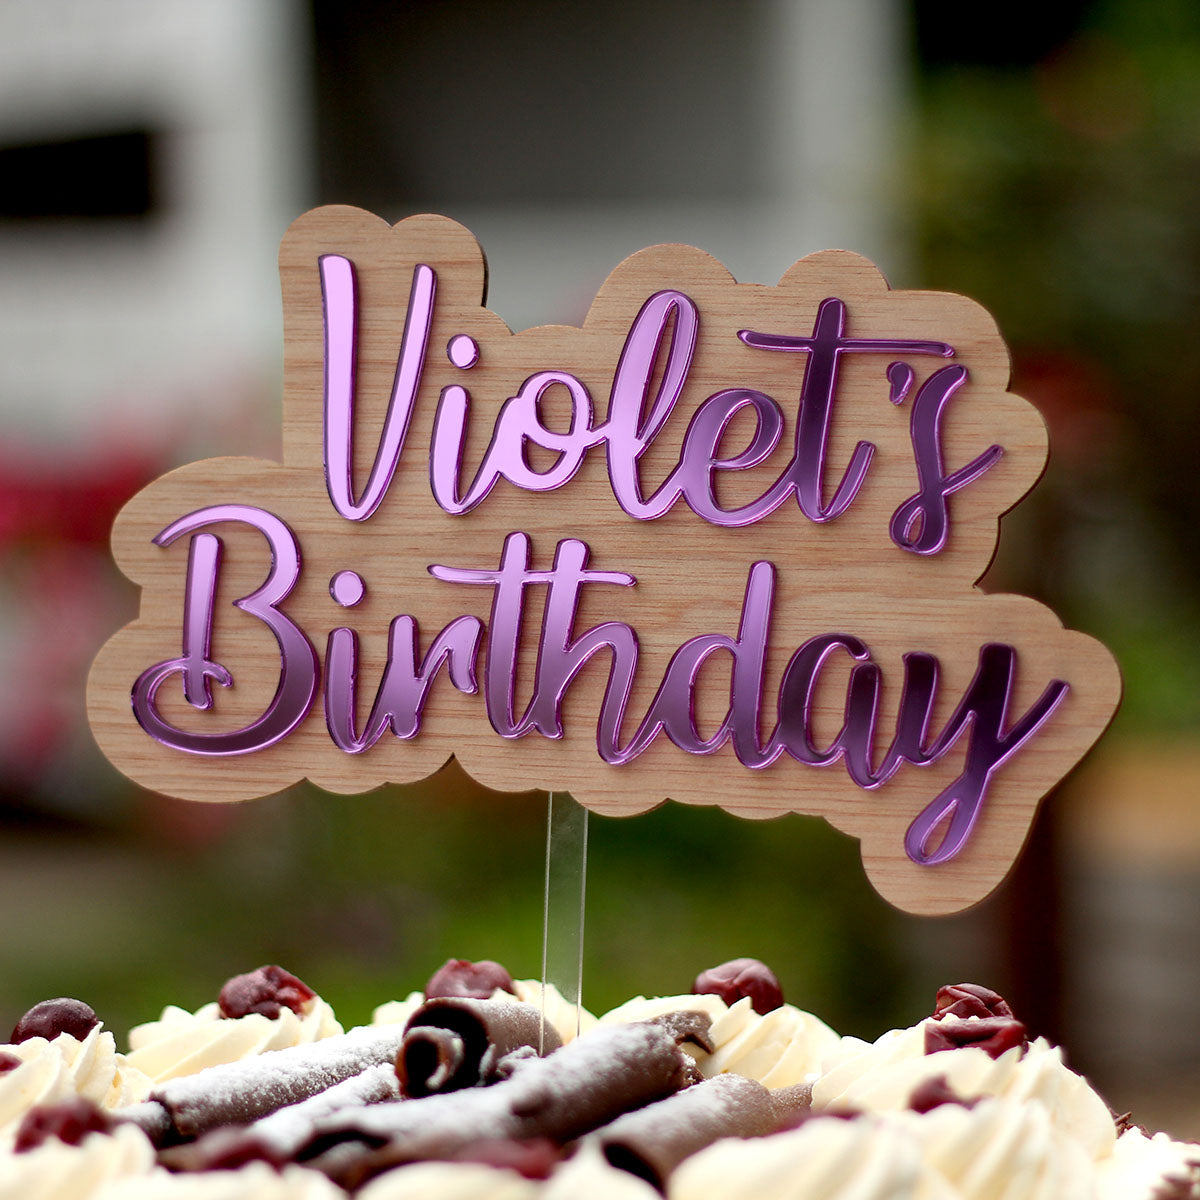 acrylic and wood cake topper with purple mirror words "Violet's birthday"